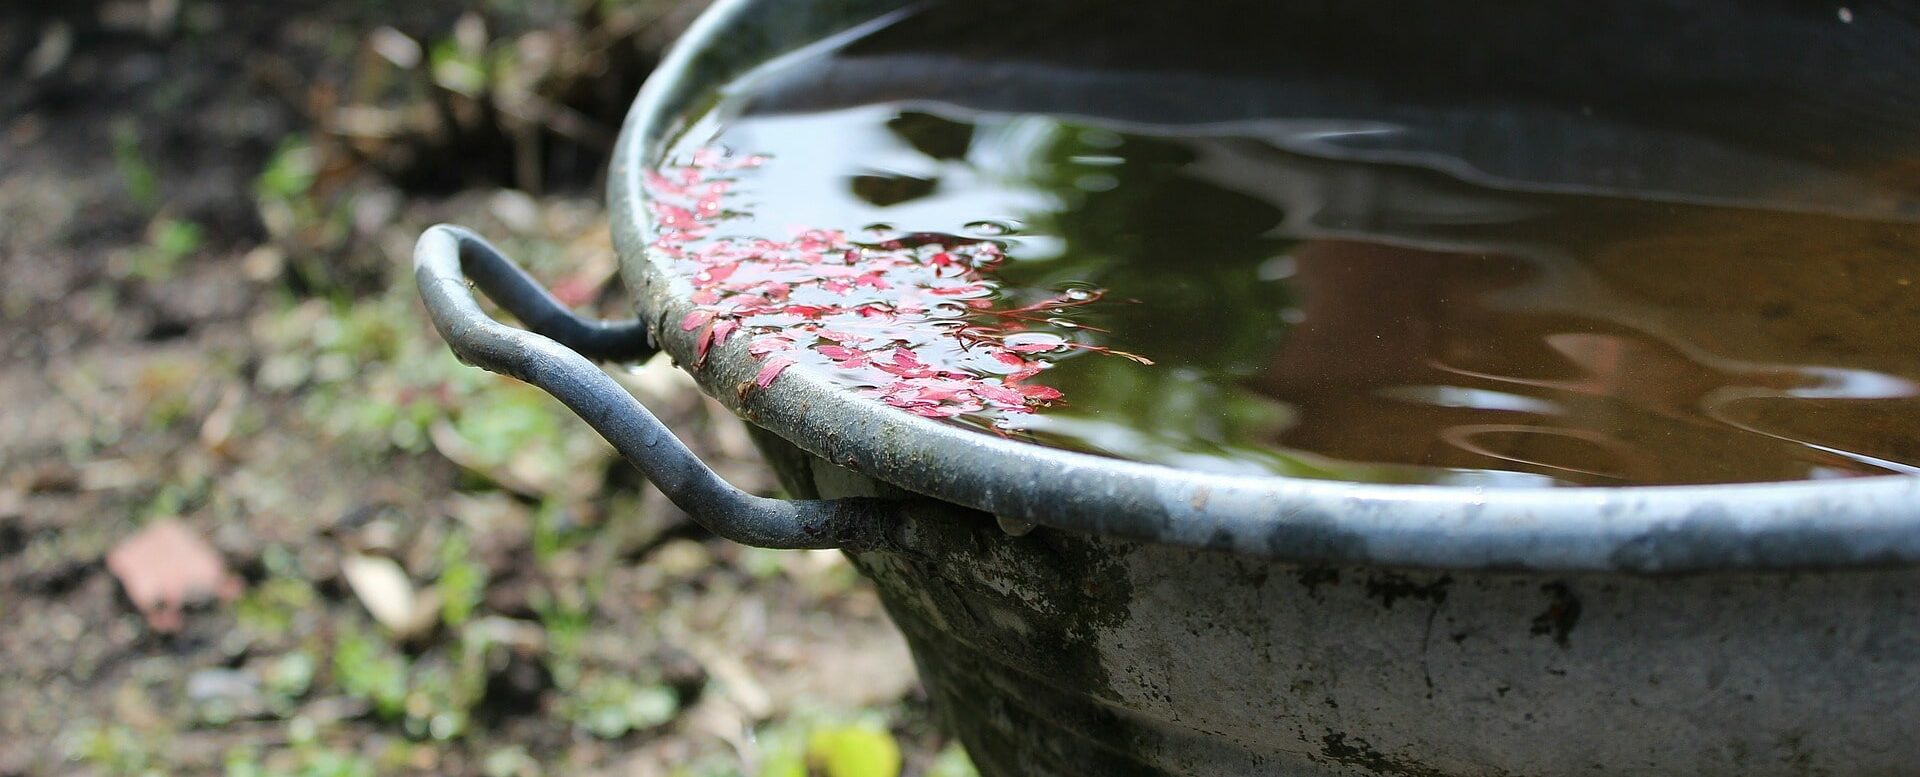 Harvesting and recycling rainwater to feed your lawn